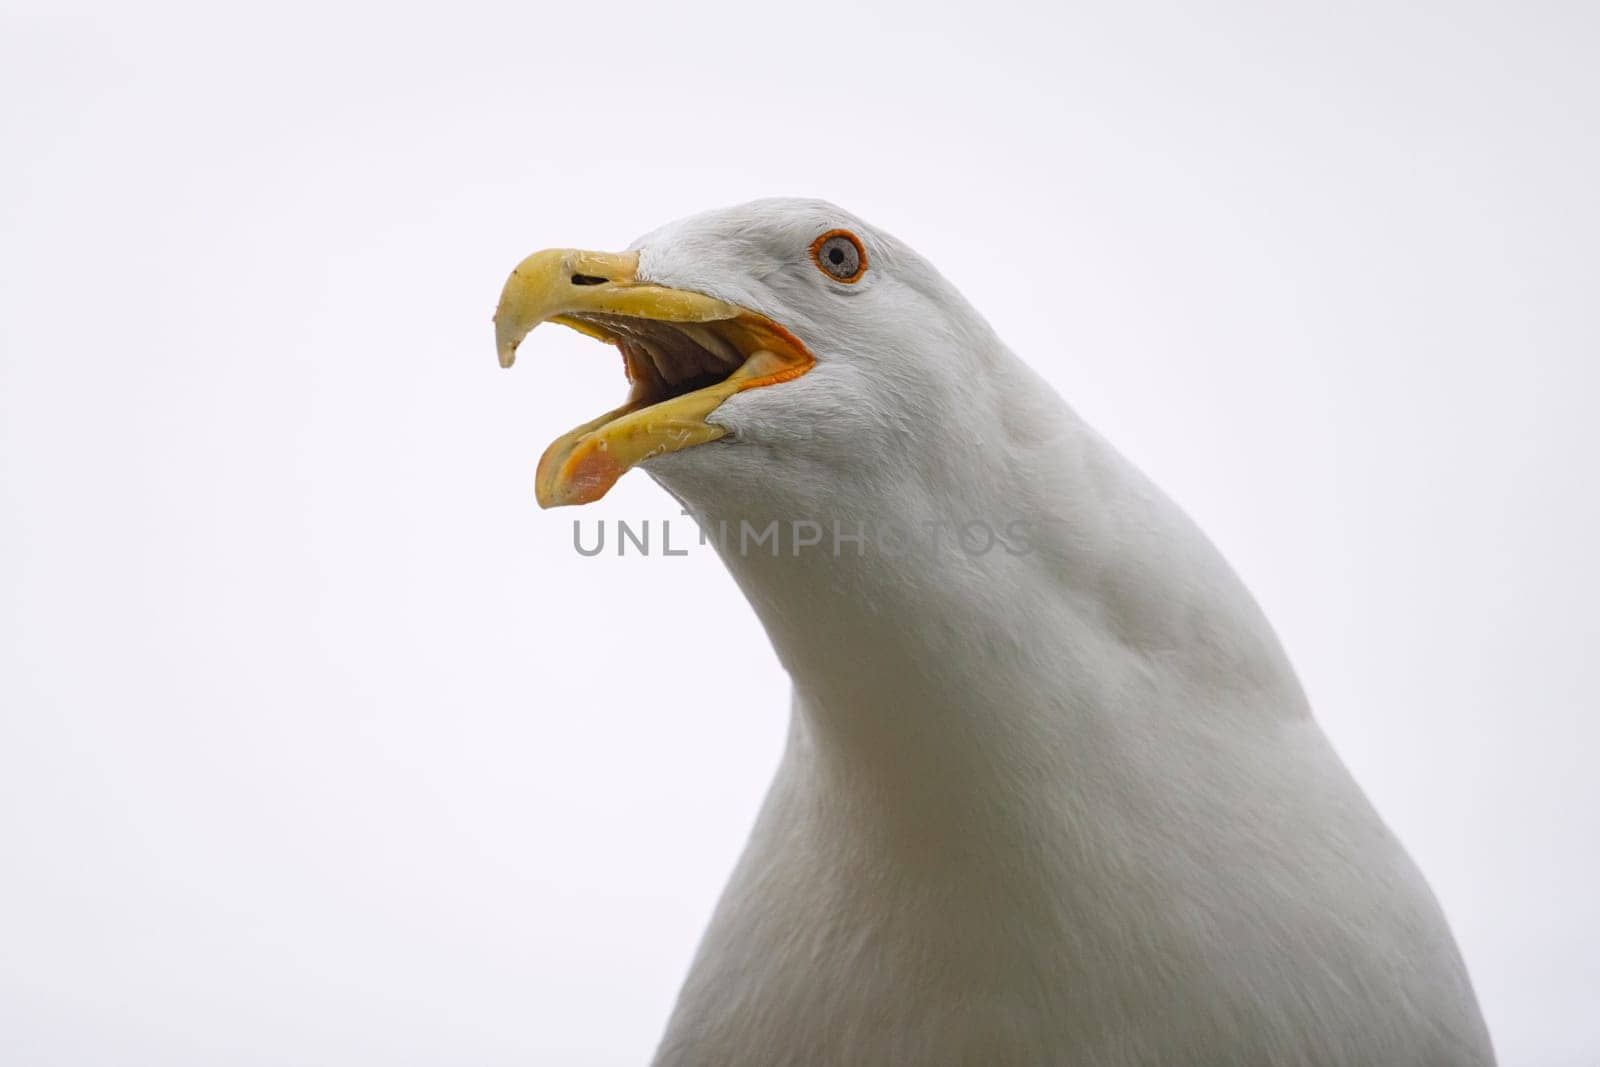 Portrait, up close photo of an adult kelp gull against a white background by StefanMal